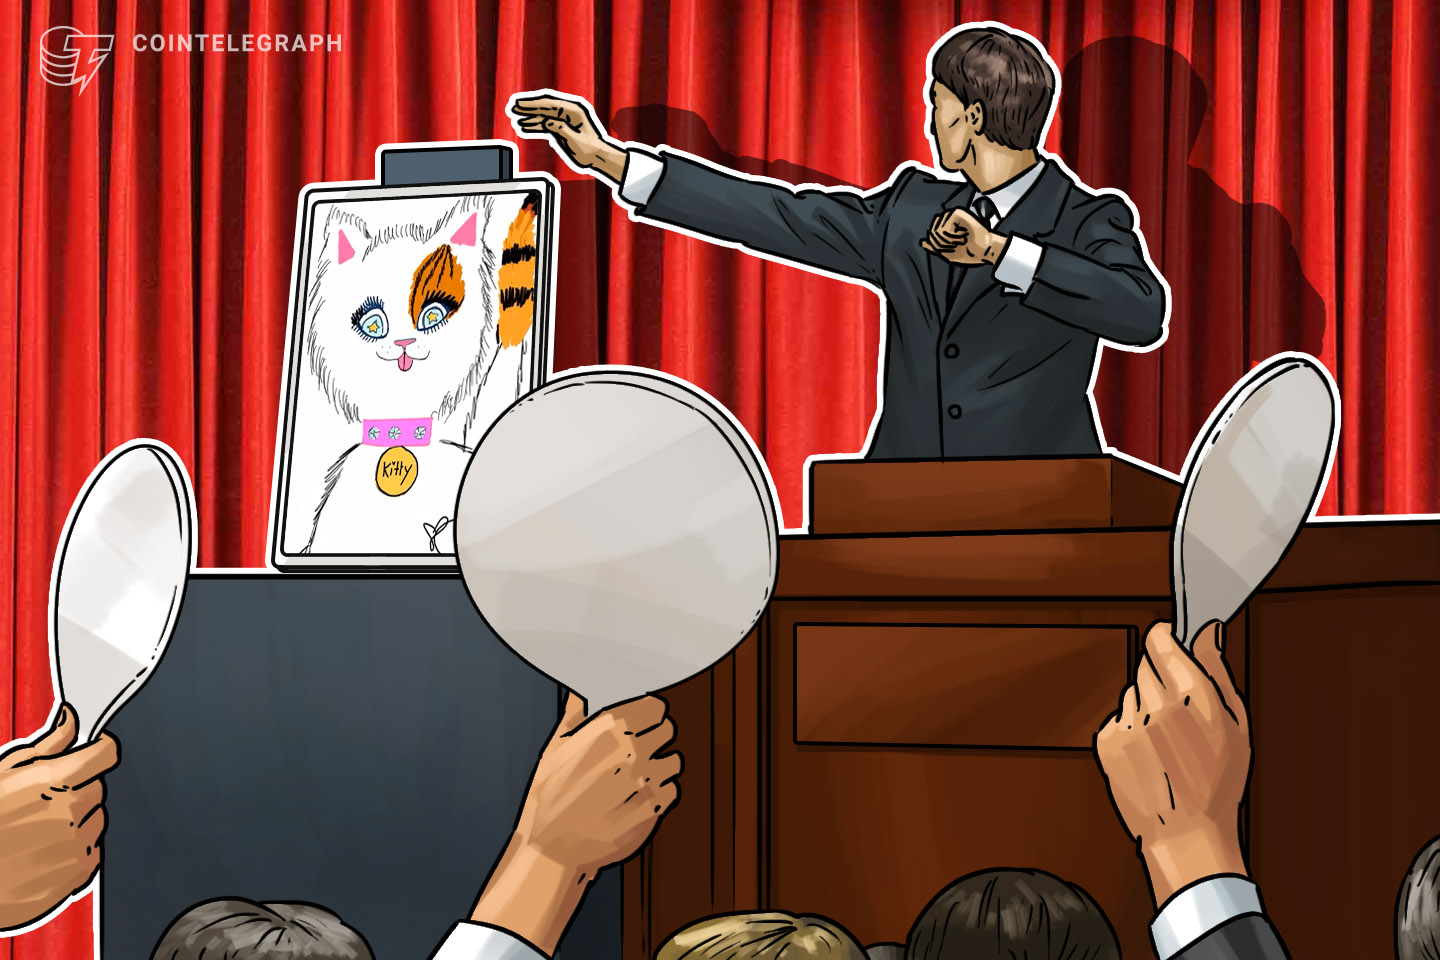 Paris Hilton Drew a Cat and it By some means Bought for $17,000 in ETH